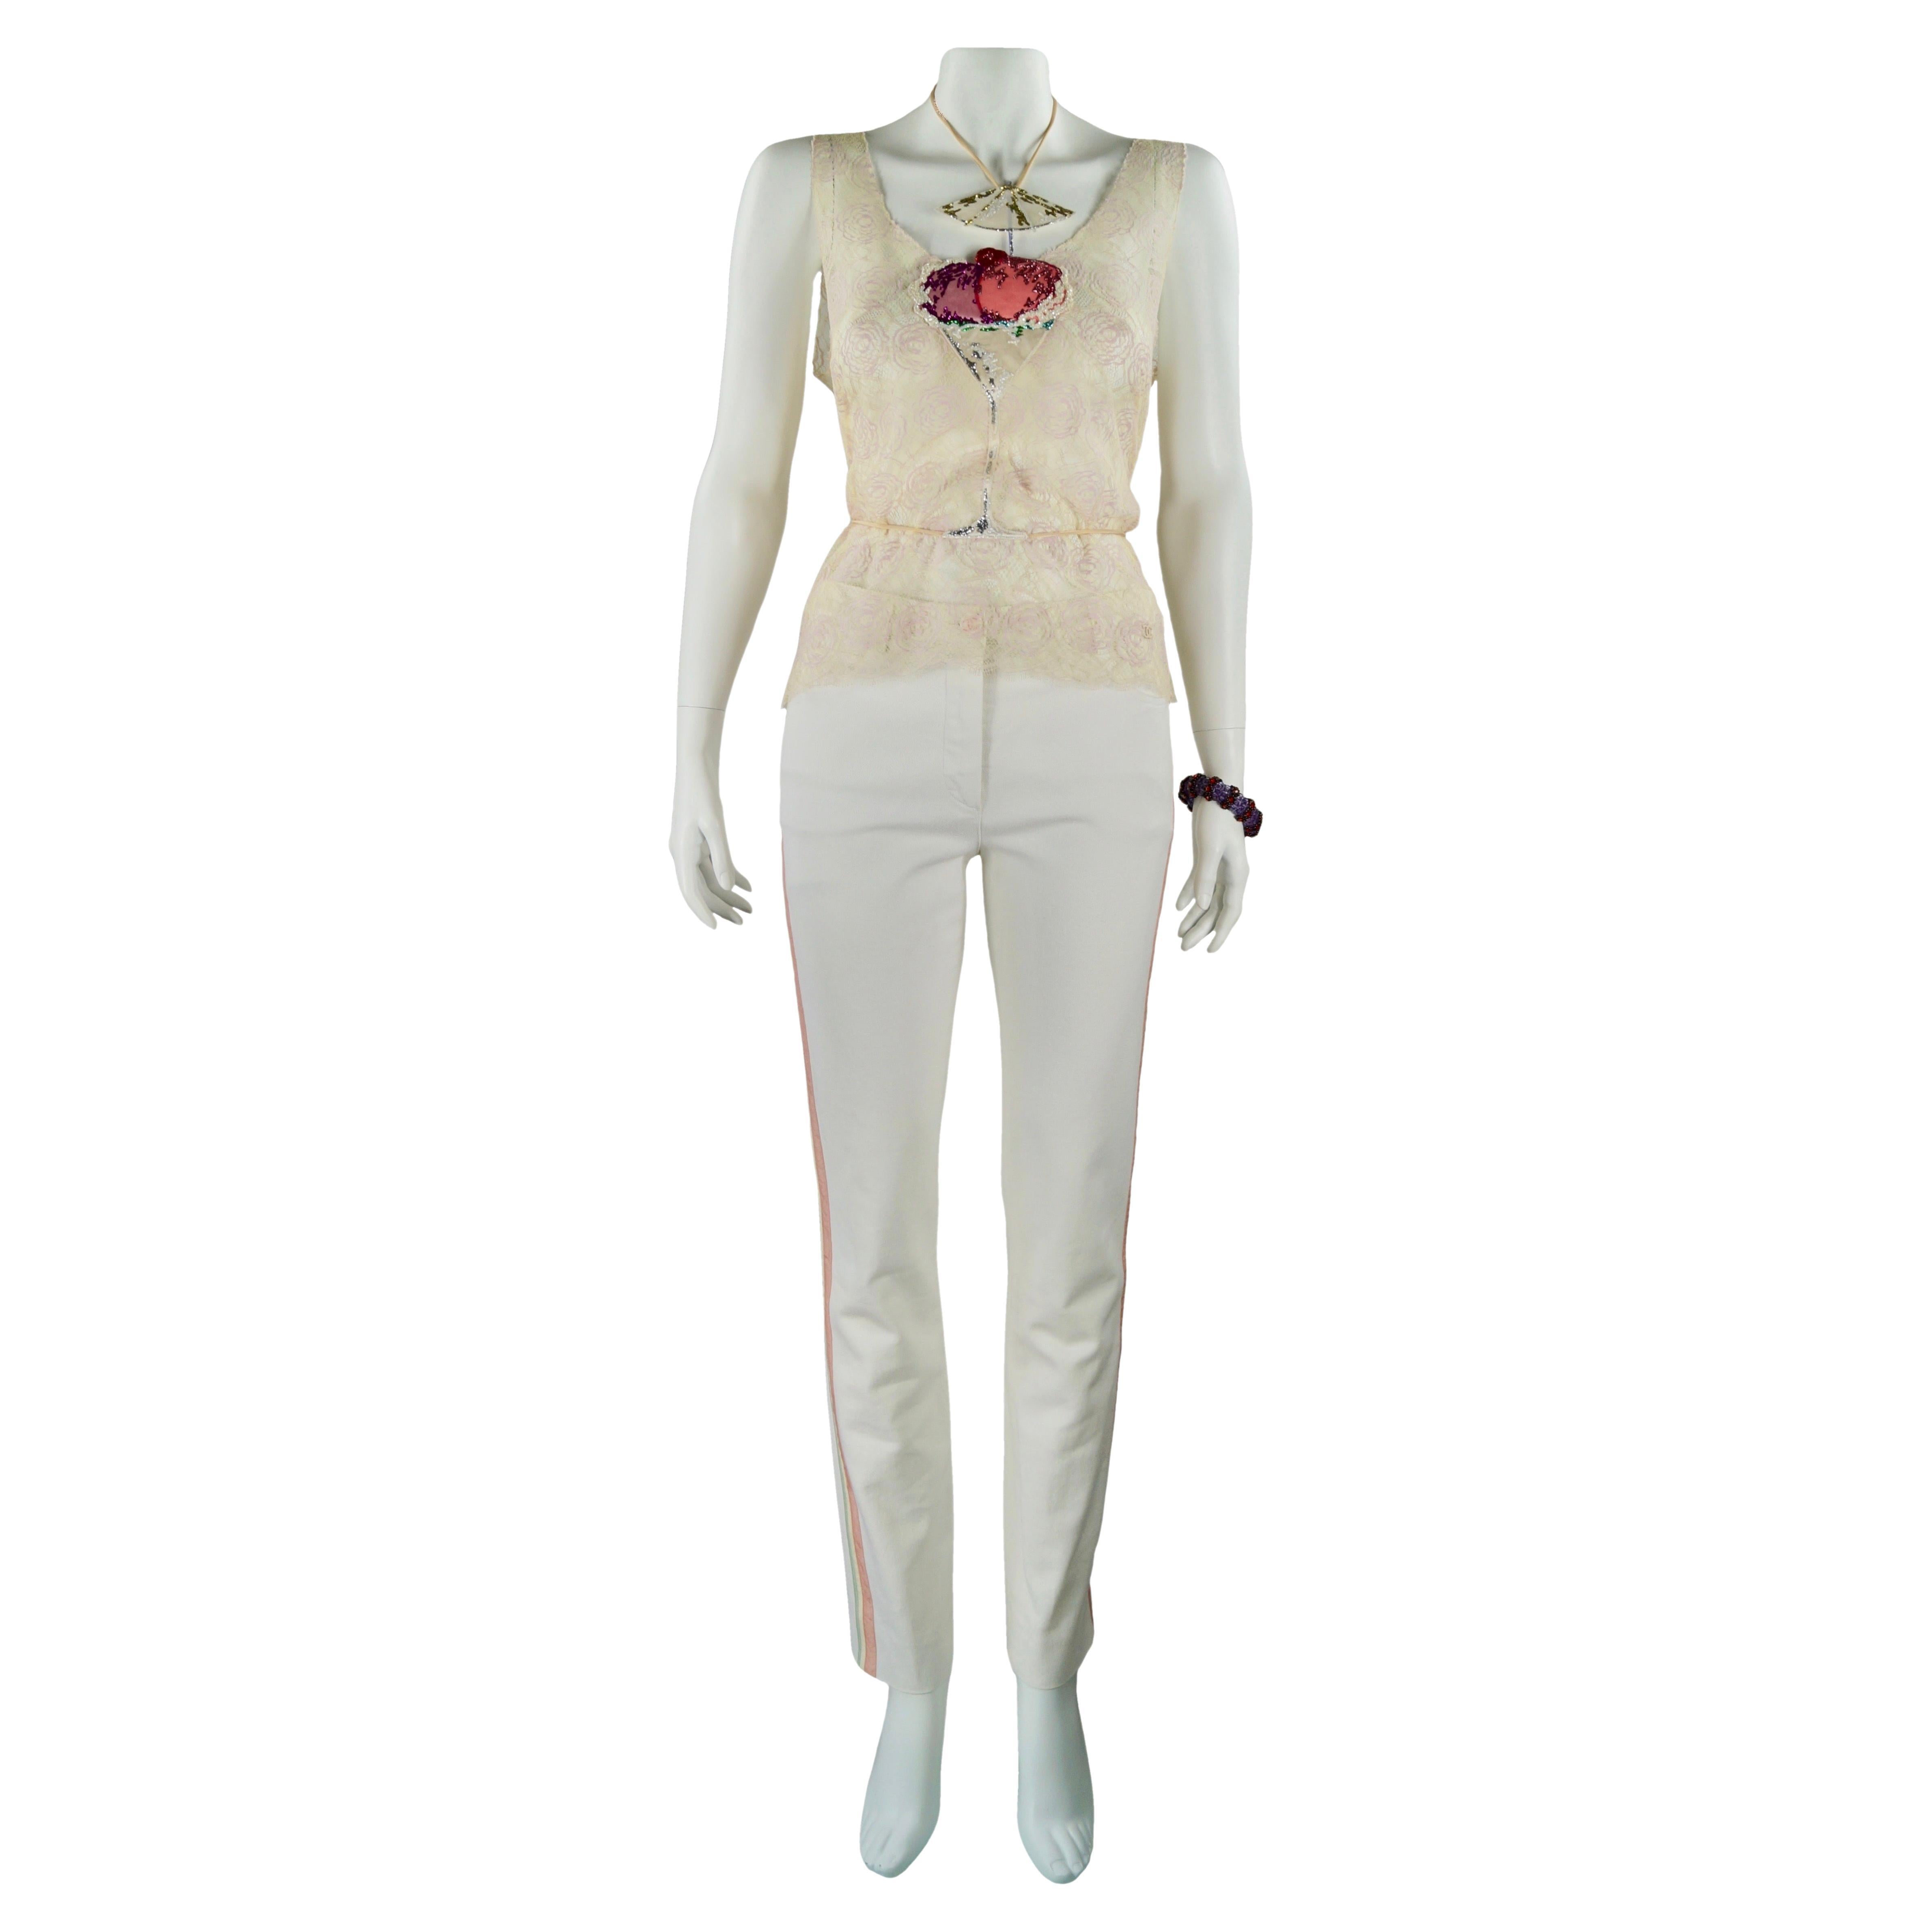 CHANEL  lace top and white jeans Fr 42 - 38  Resort 2004  04C